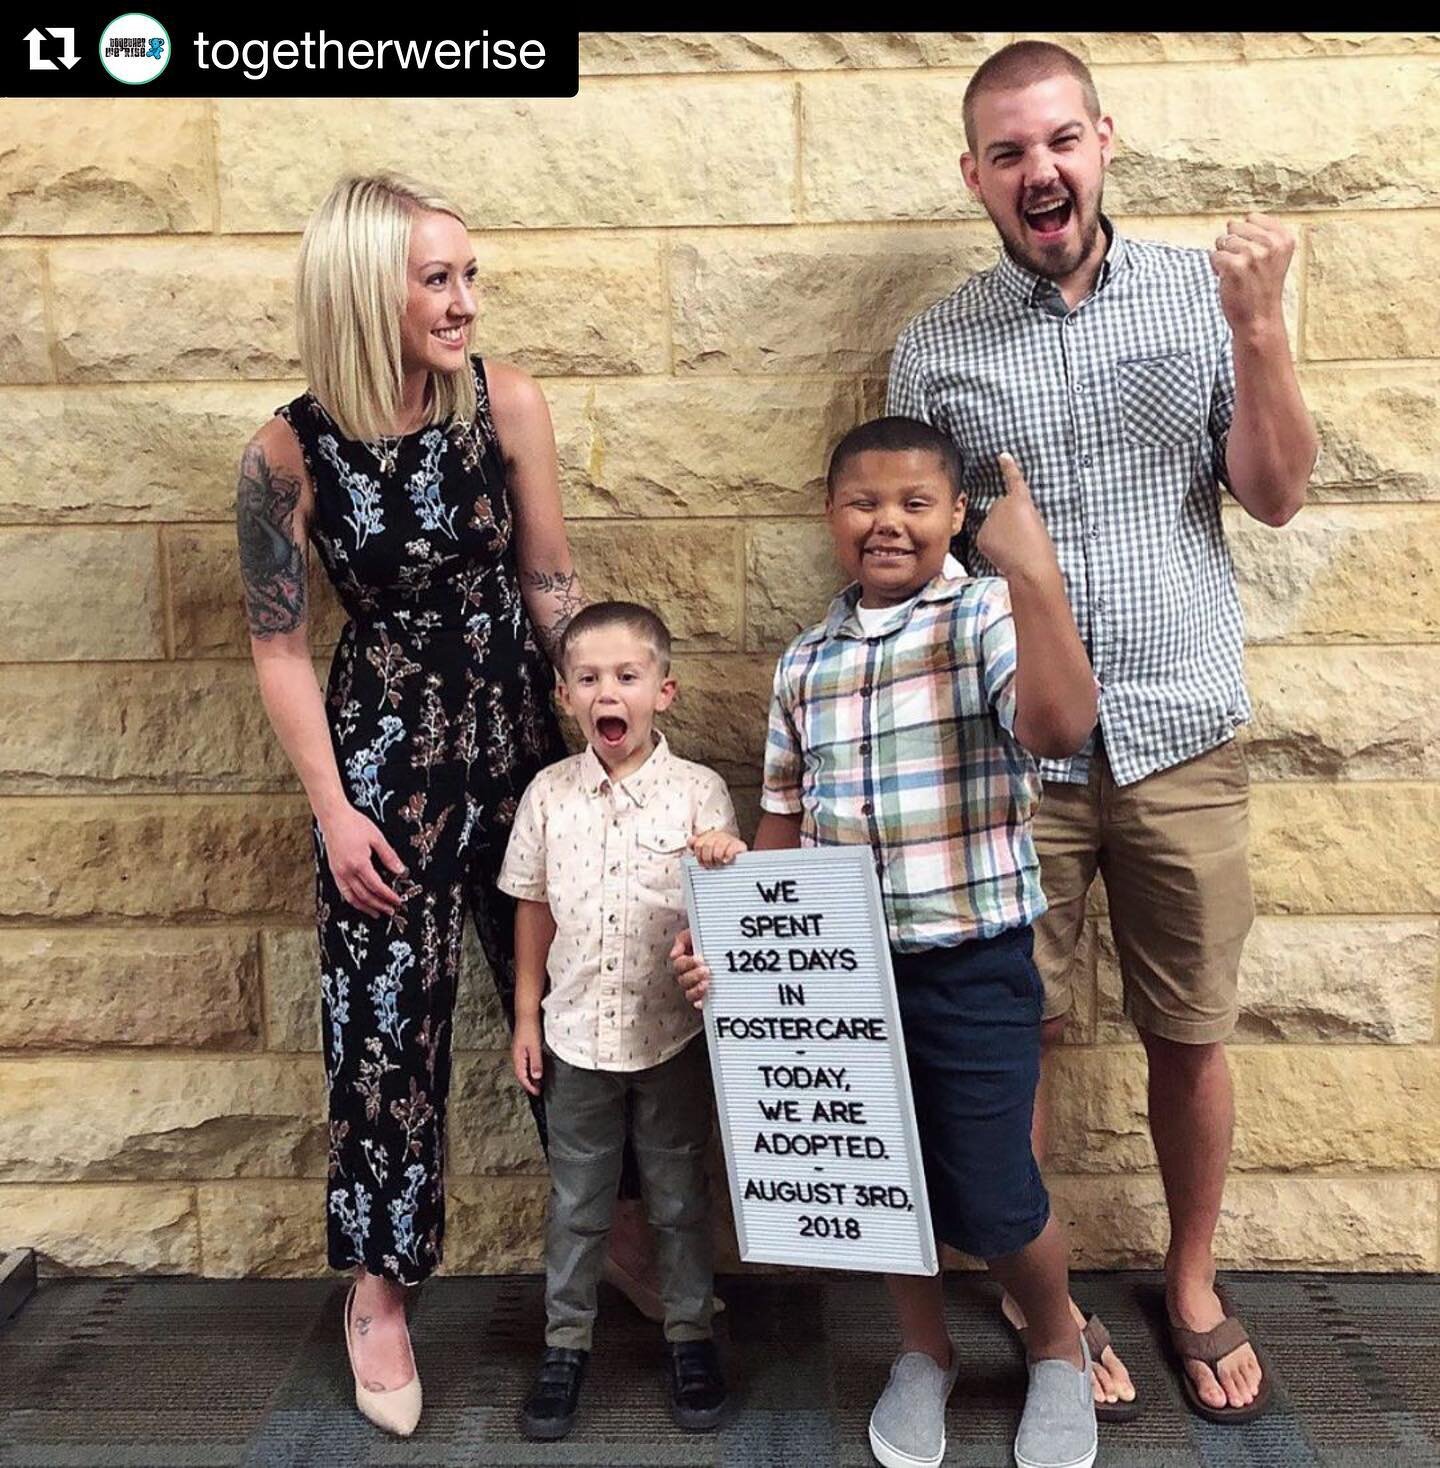 Foster to adoption is the ultimate goal for our kids. Whole, healthy, loving, and stable families will be the reason the cycle of poverty and abuse are broken in our communities. Heartiest congratulations to this beautiful family and all the healing 